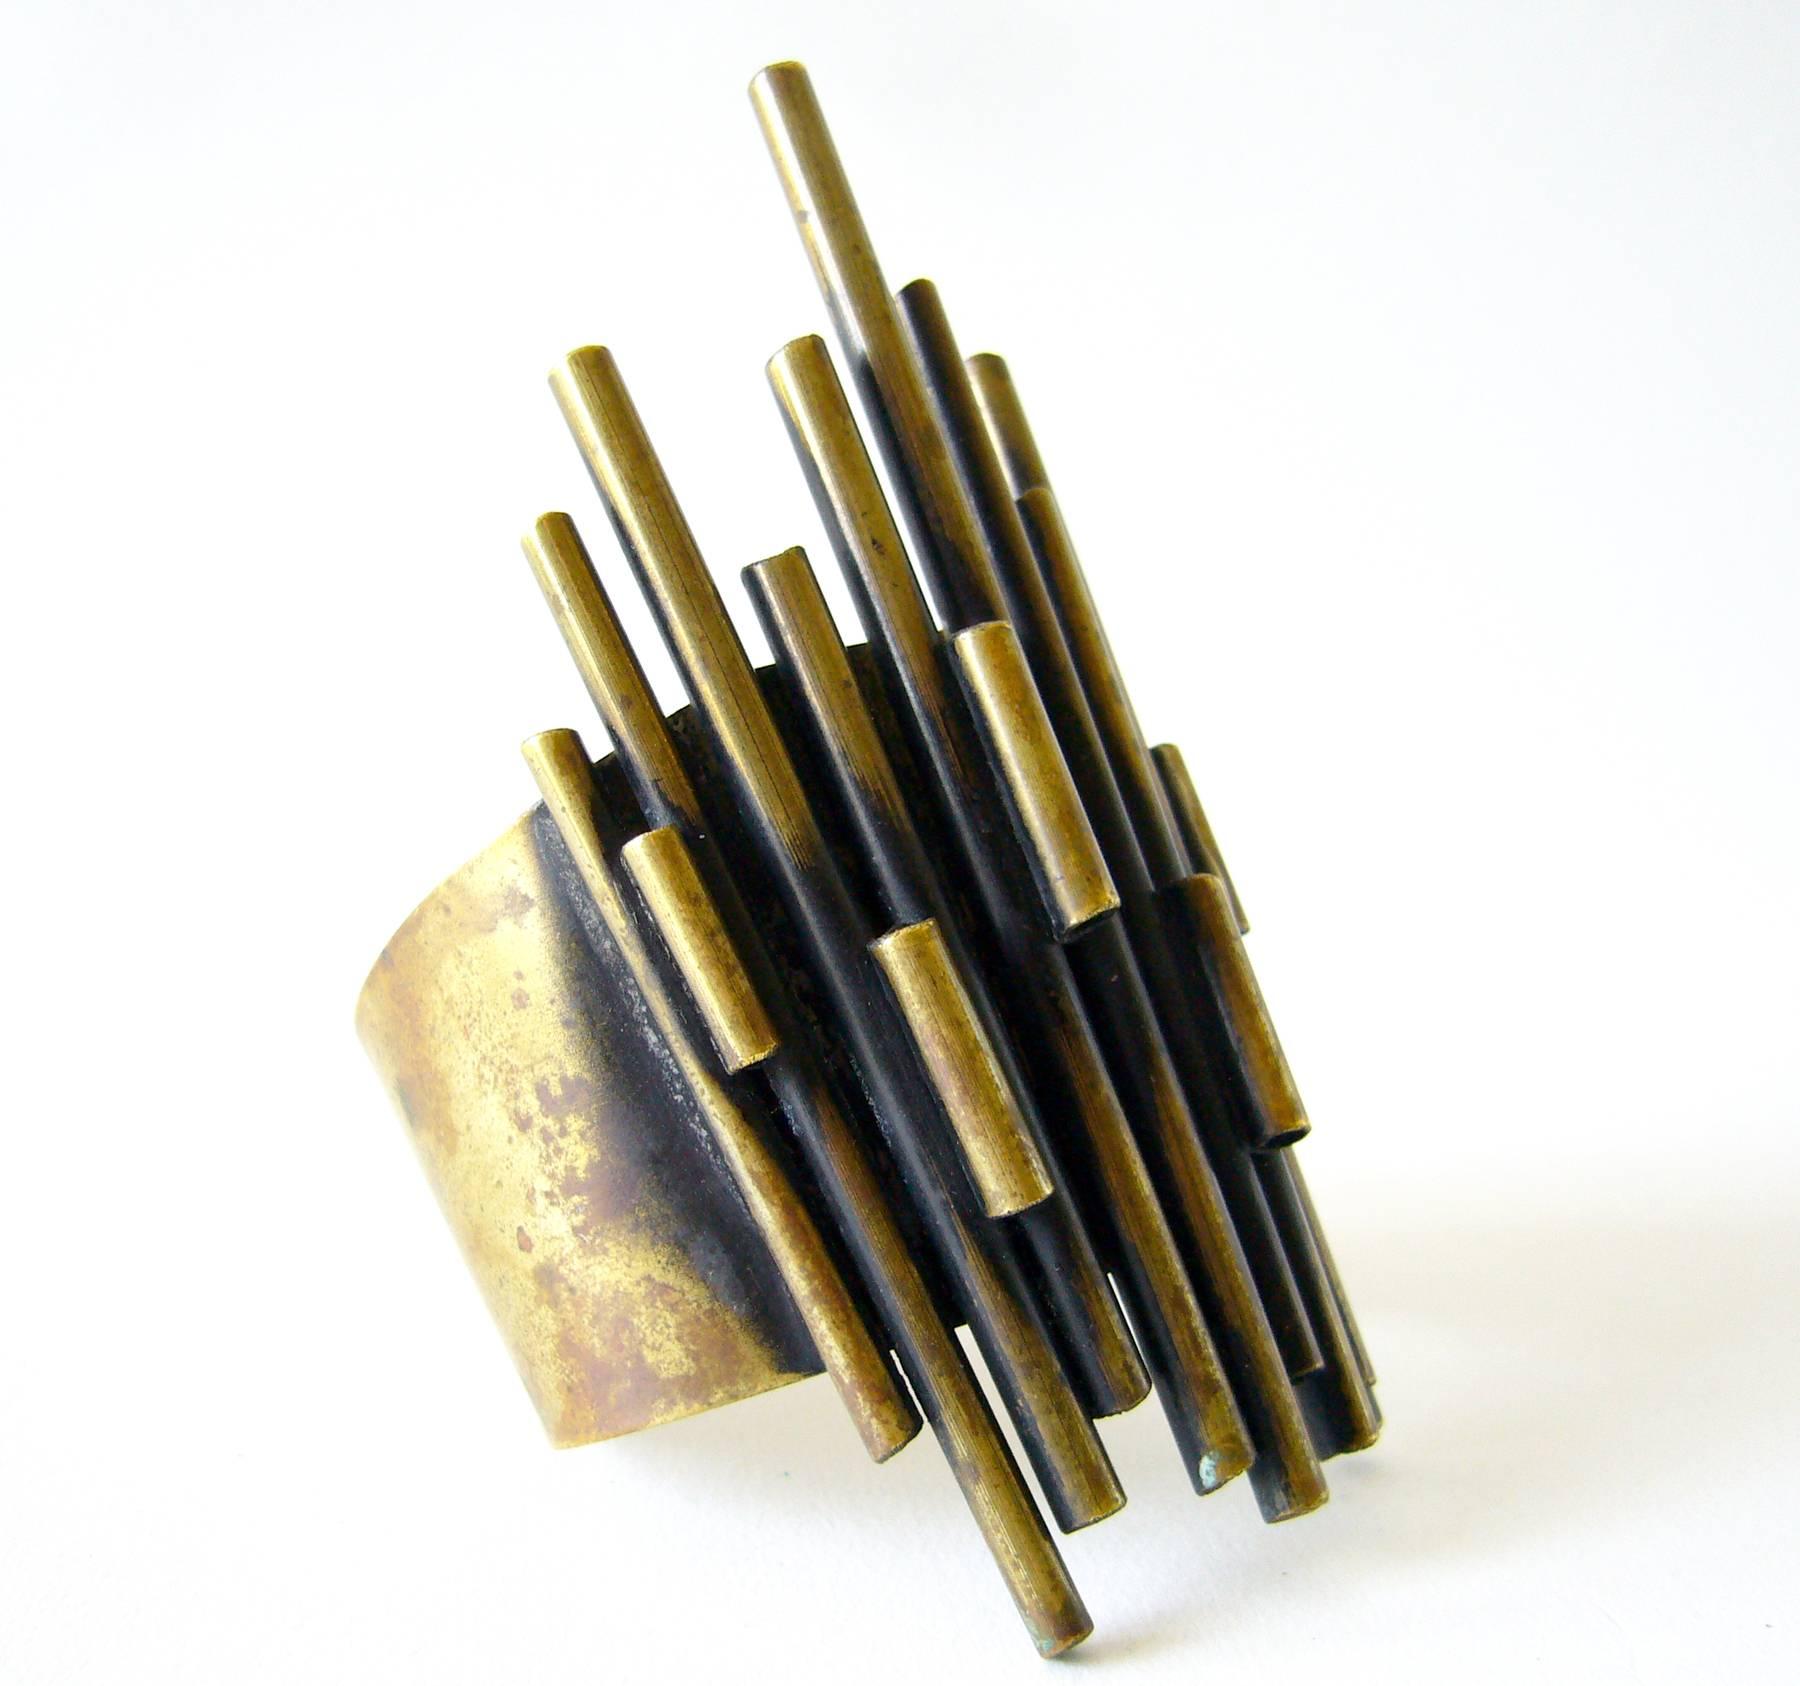 Wide cuff bracelet made of layered bronze tubes, created by Industria Argentina. The face measures 4.25